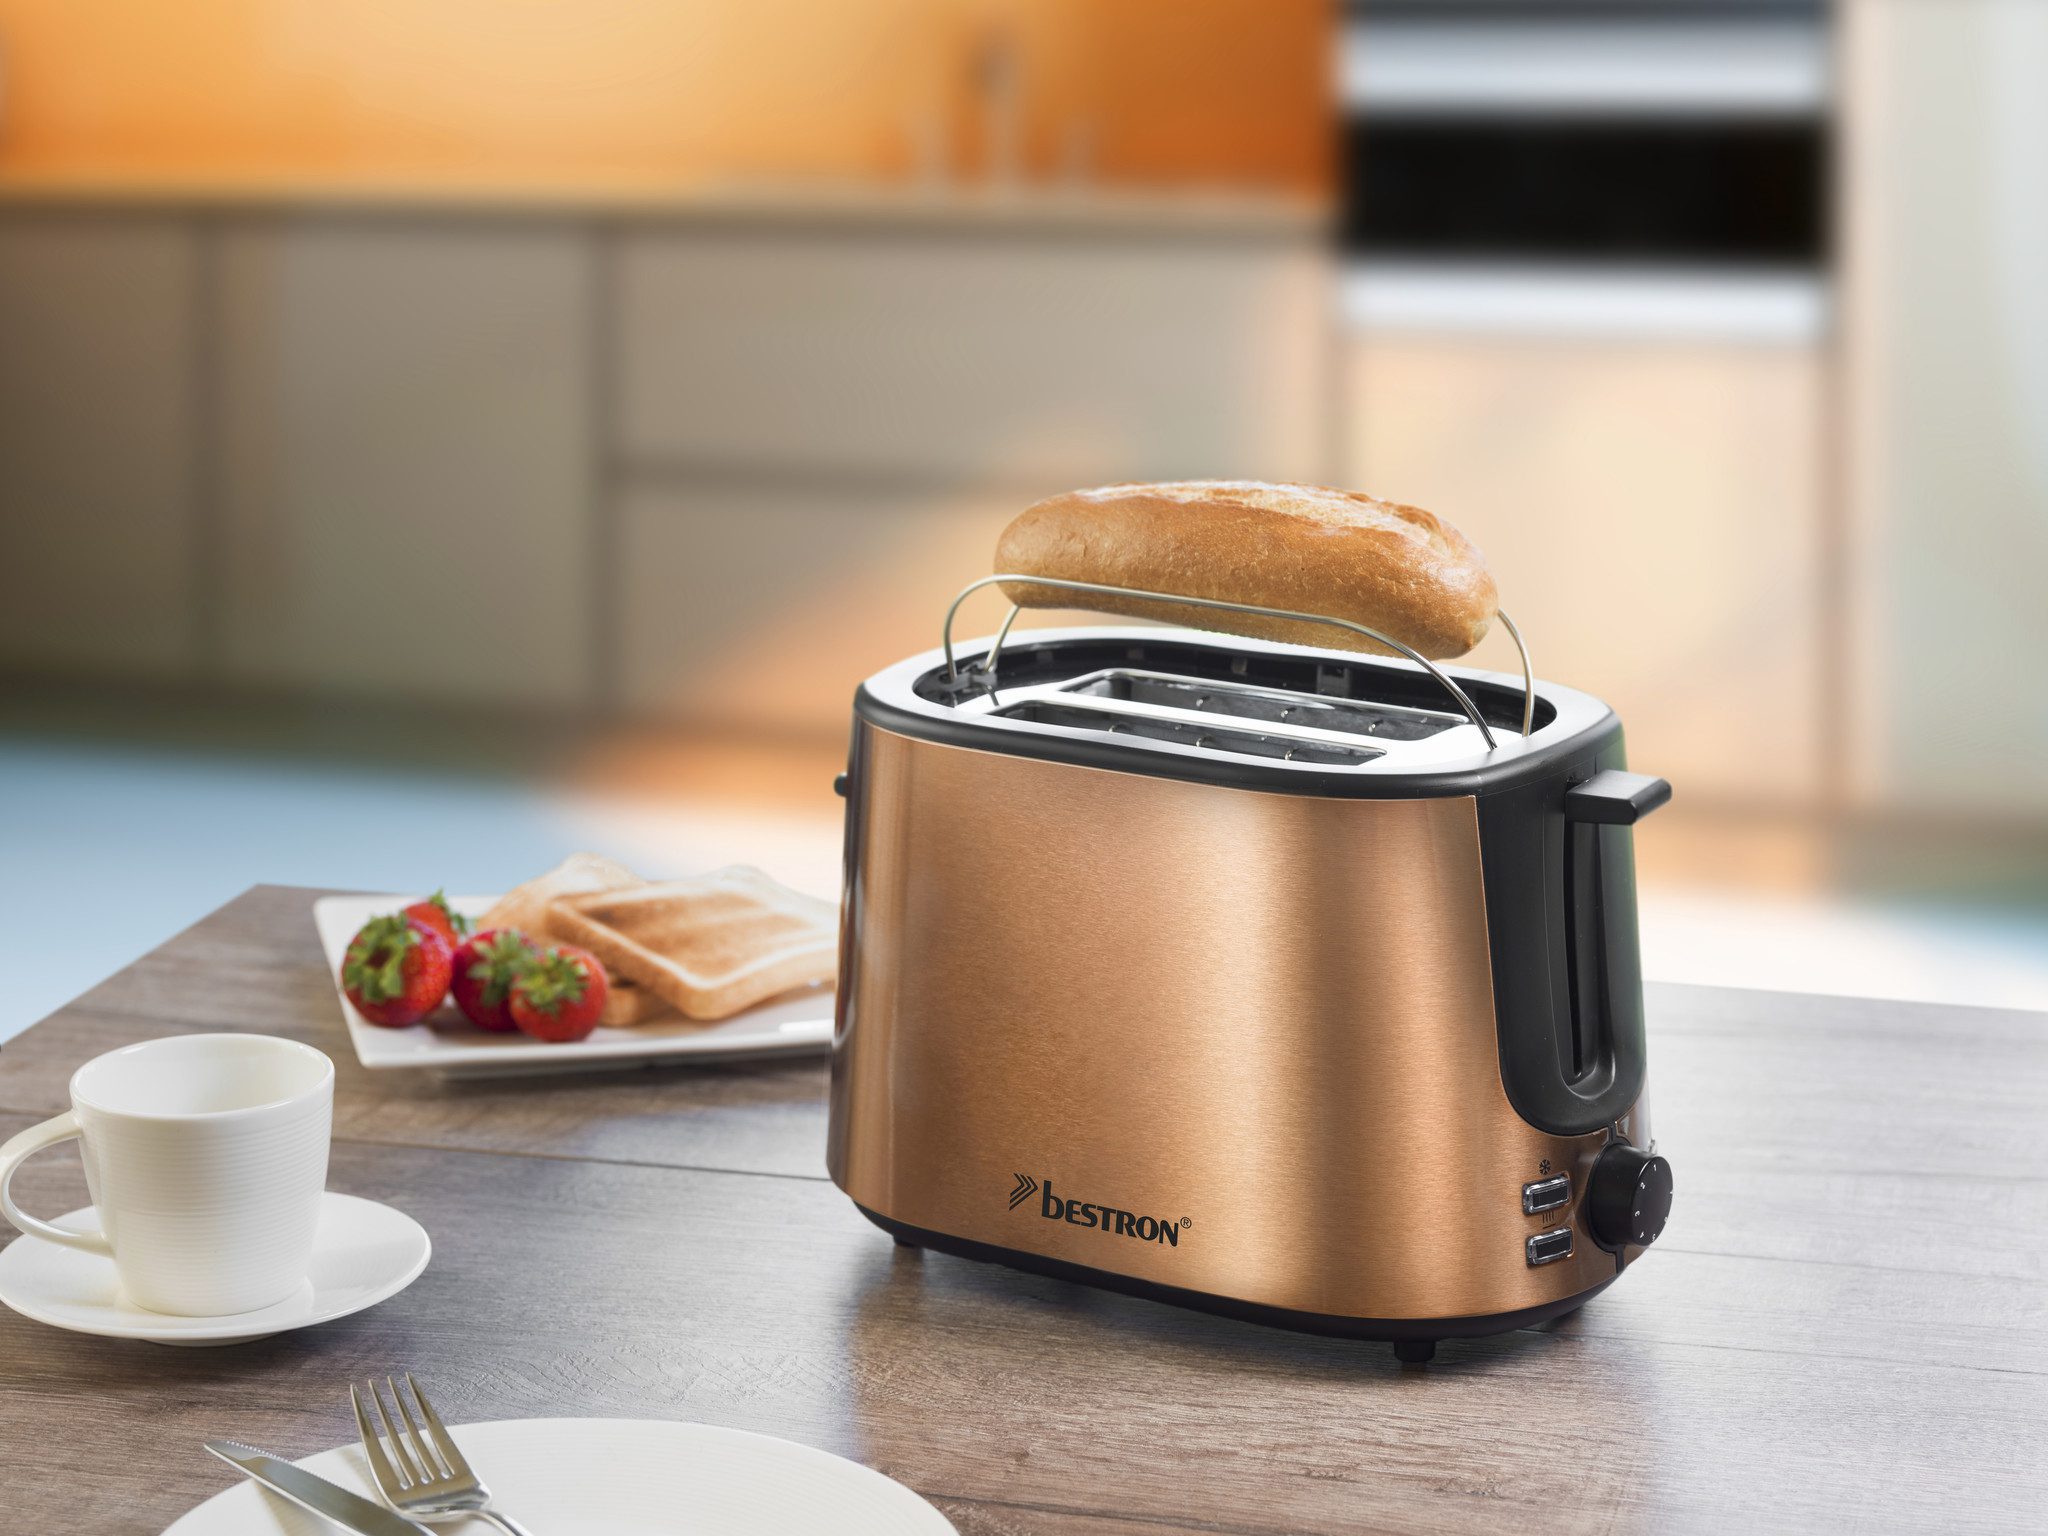 Oster 2 Slice Toaster, Metropolitan Collection with Rose Gold Accents